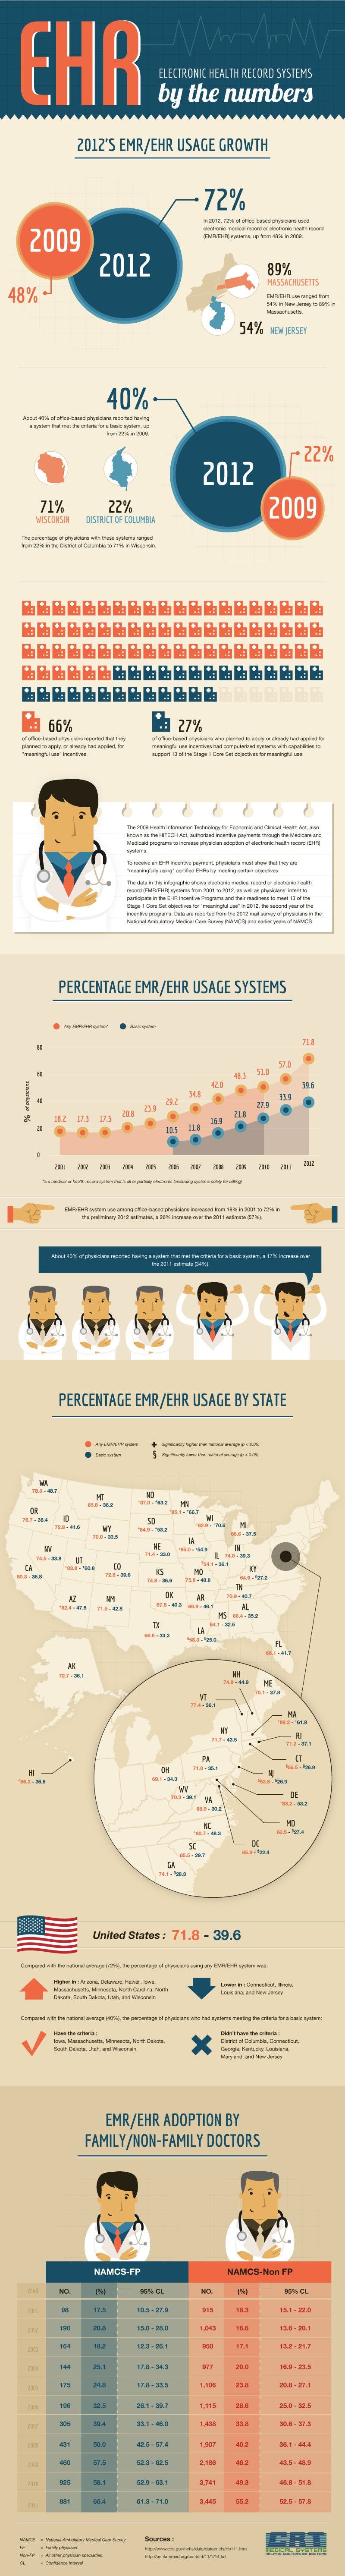 EHR Use by the Numbers: Meaningful Use Spurring Adoption